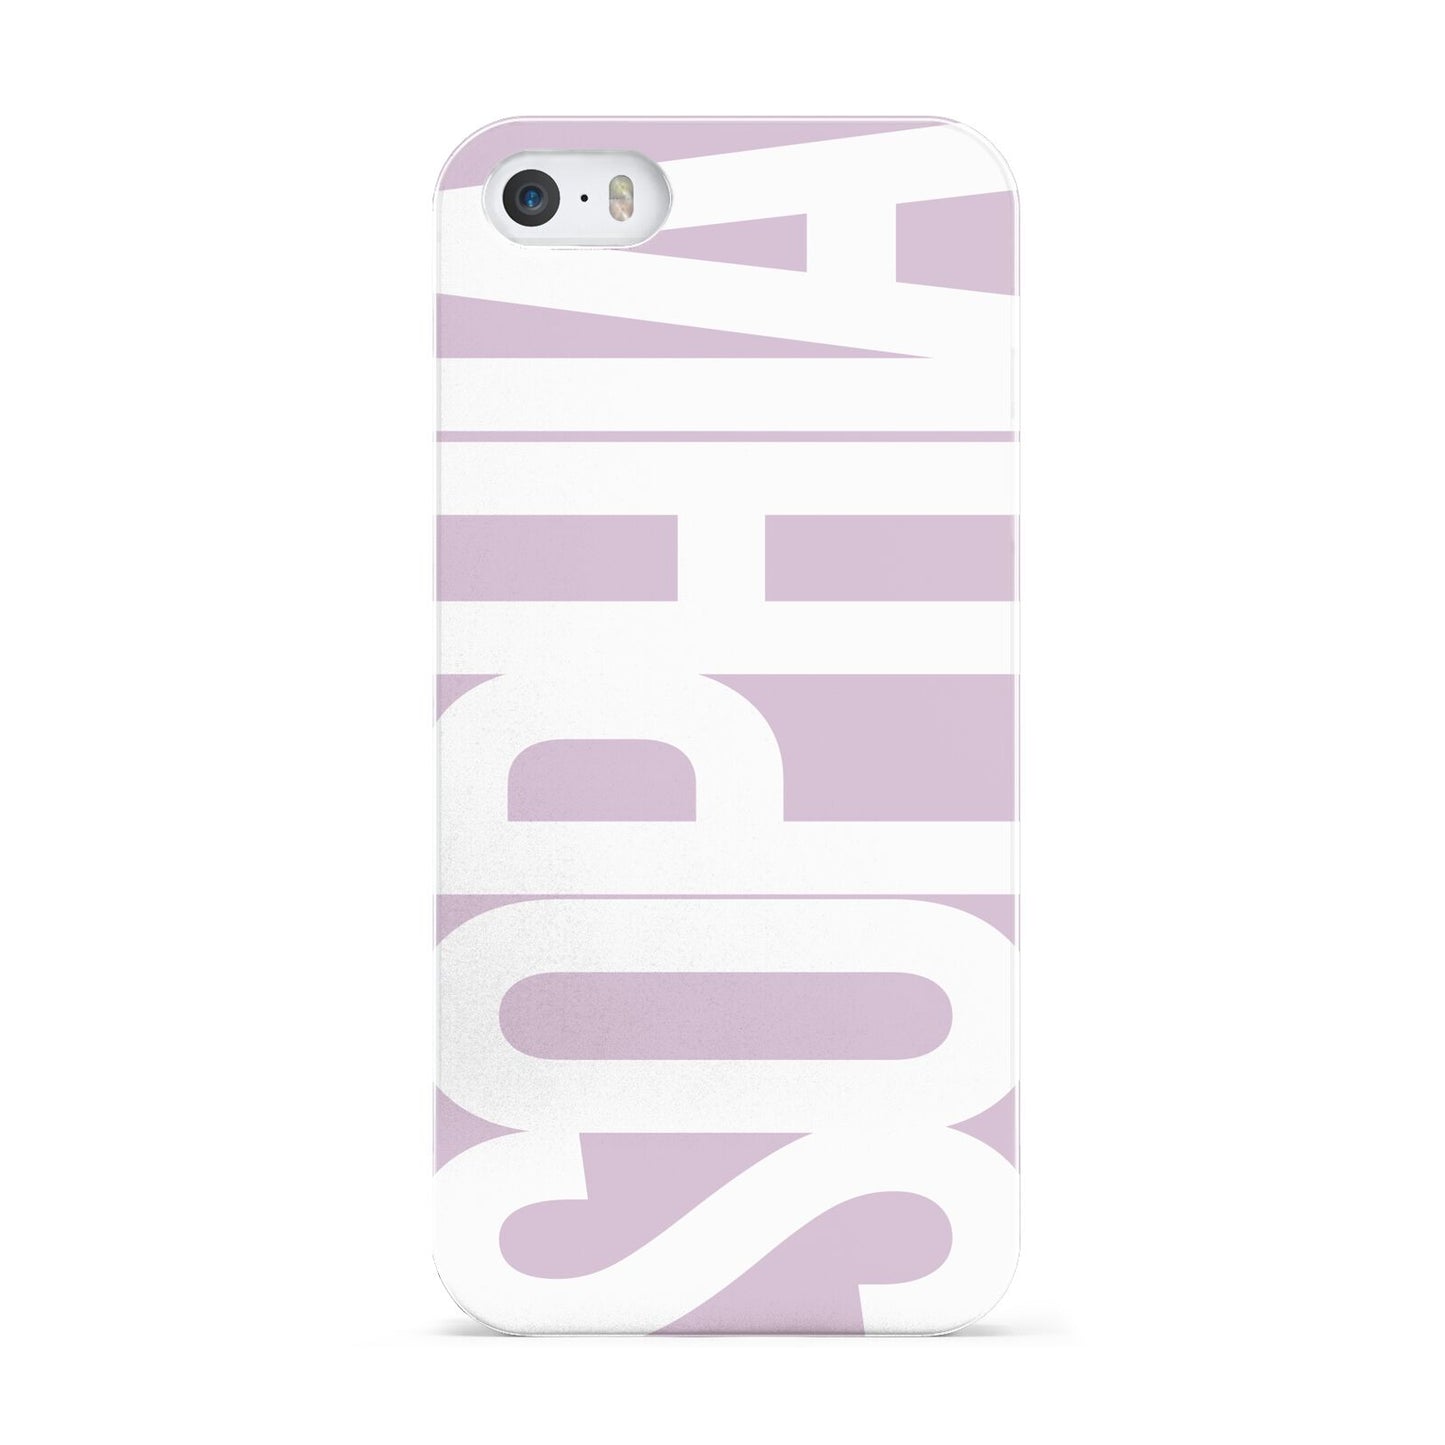 Dusty Pink with Bold White Text Apple iPhone 5 Case